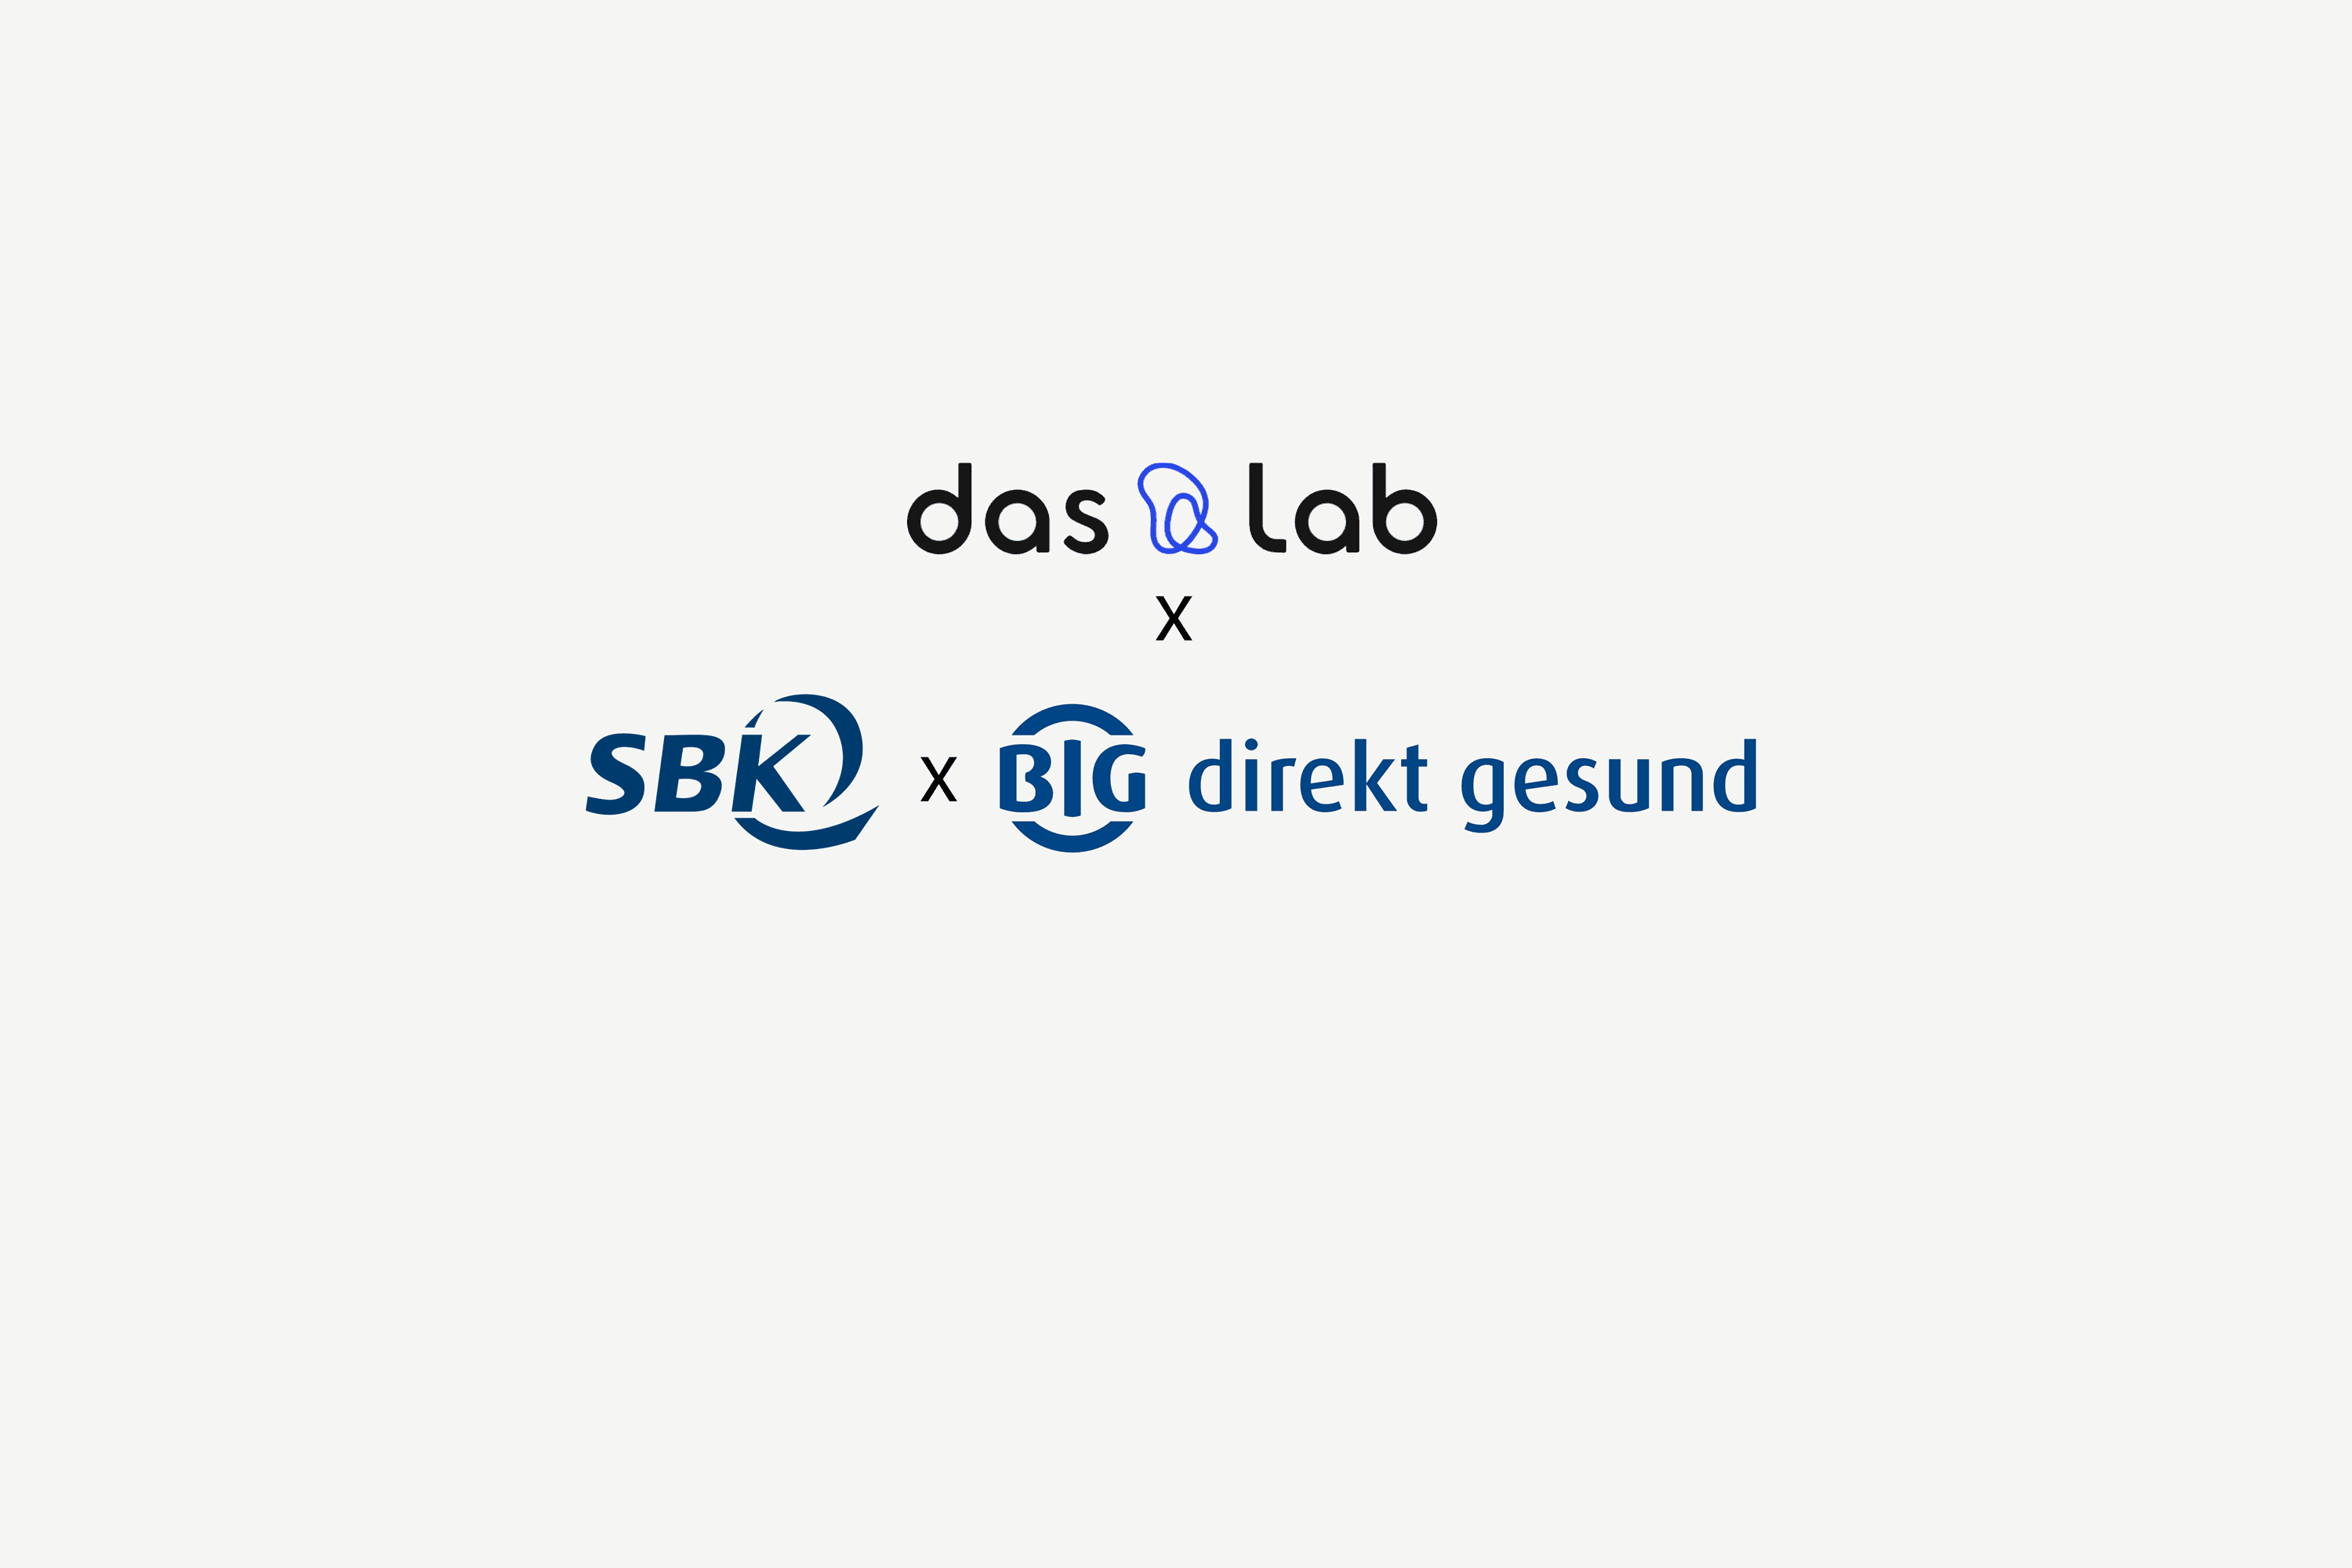 SBK, BIG direkt and DasLab launch innovative program for early detection of colorectal cancer